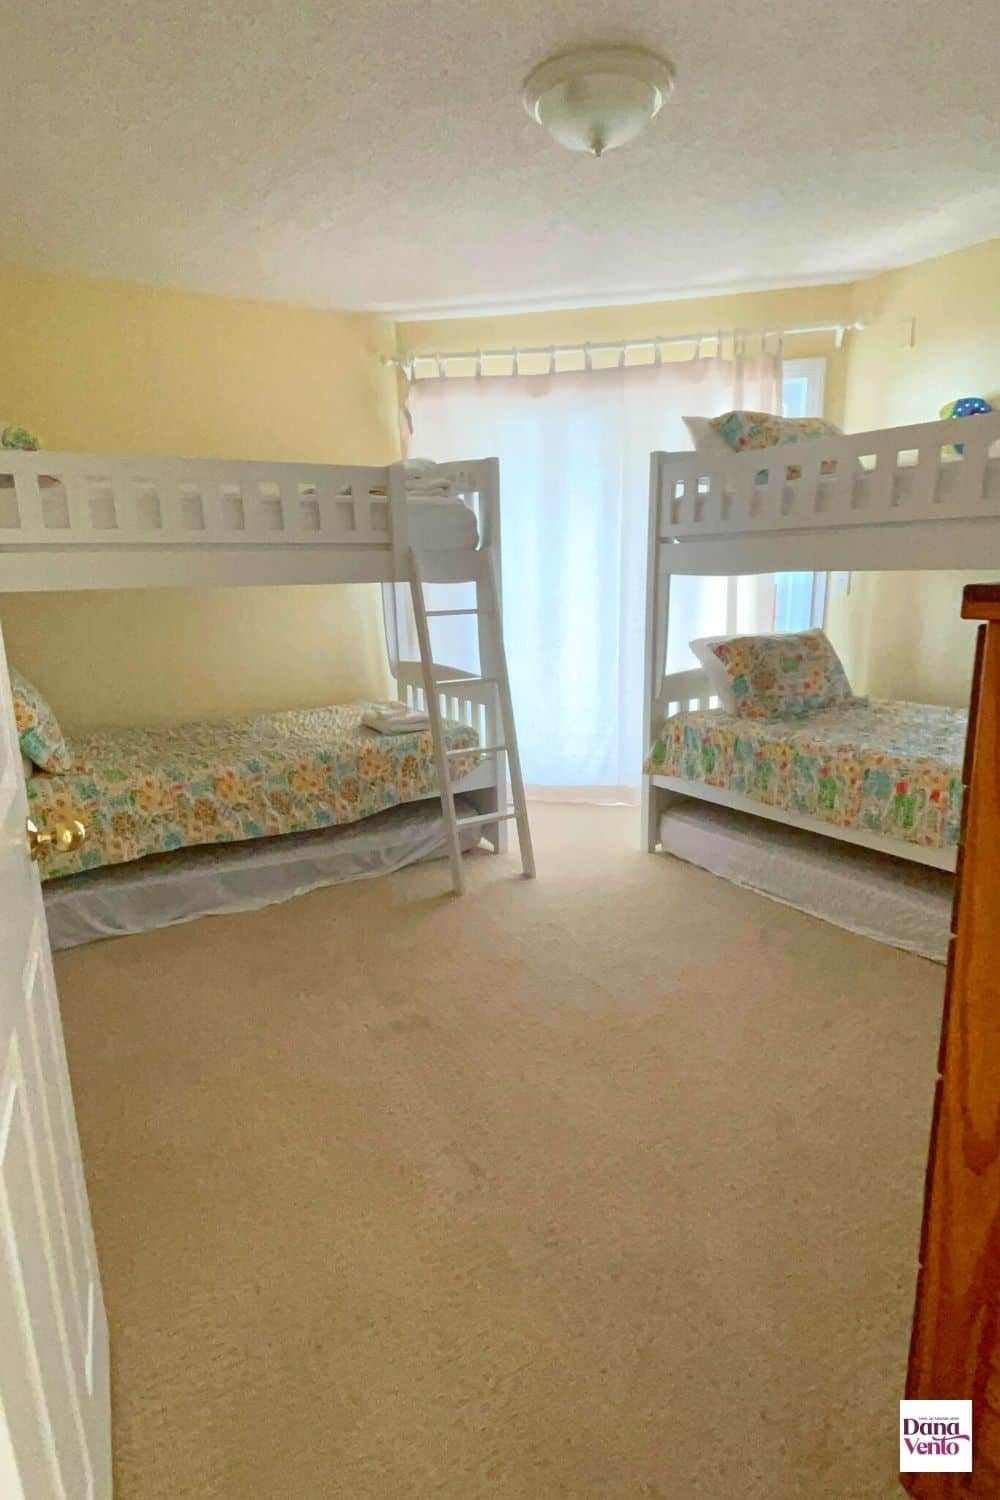 Bedroom to the Jack N Jill Bathroom Largest Outer Banks Vacation Rental Mistake